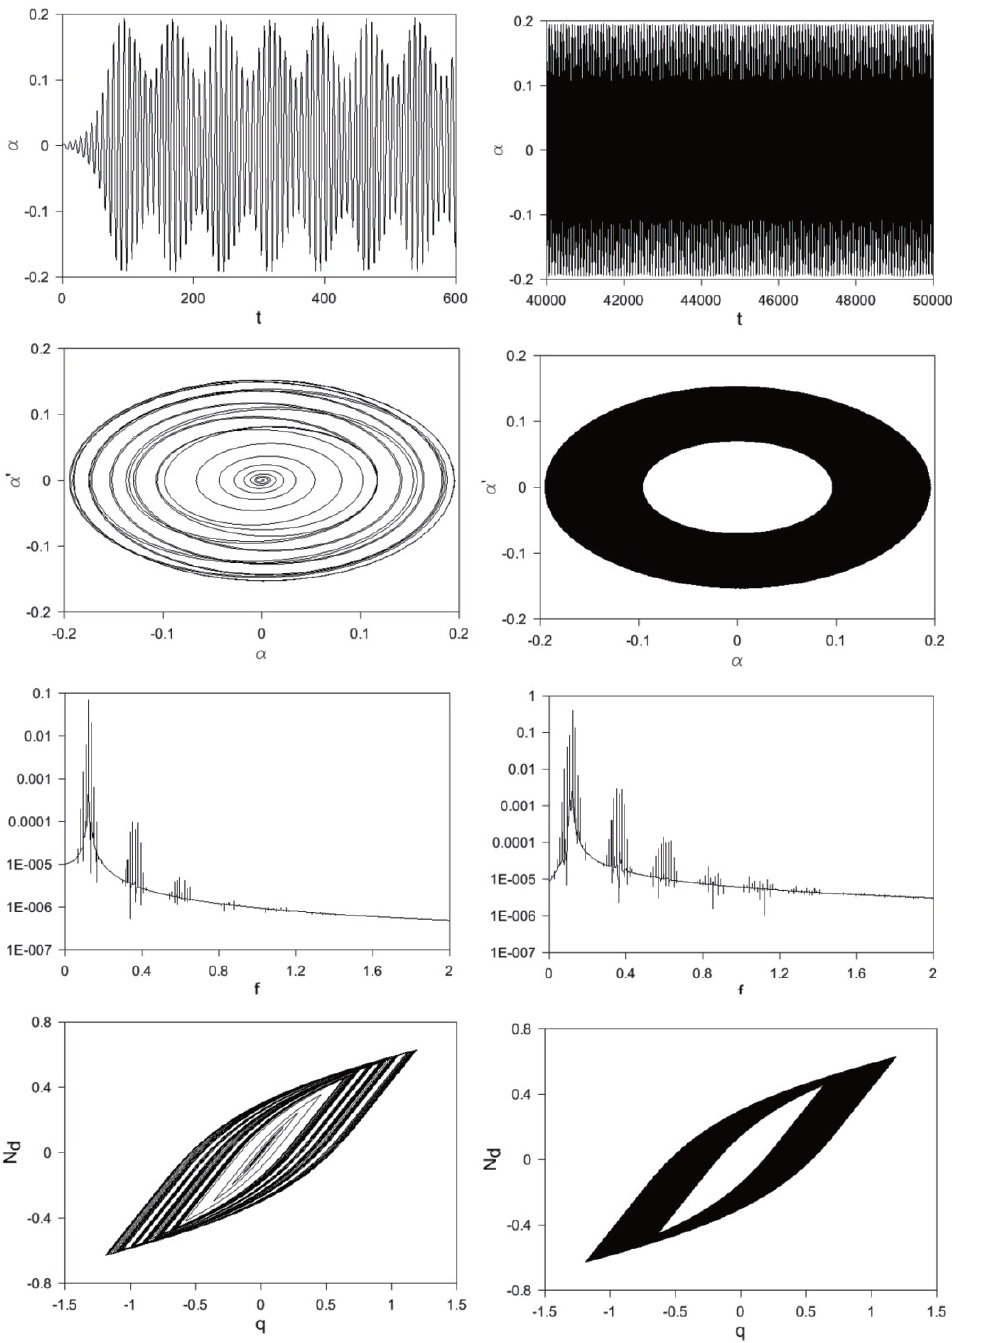 From left to right: (top) time history of α and phase diagrams (α ,α) in the transient phase (t ∈[0,600] and t ∈[0,200], respectively) and at steady state (t ∈[4？104, 5？104] and t ∈[3？104, 5？104], respectively), (middle) FFT of α and q, (bottom) loops of total vibration absorber force in the transient phase (t ∈[0,600]) and at steady state (t ∈[3？104, 5？104]), when ζd = 0 and V = 3.66 Vcr with Vcr = 2.1. The peak in the FFT is attained by f= 0.122